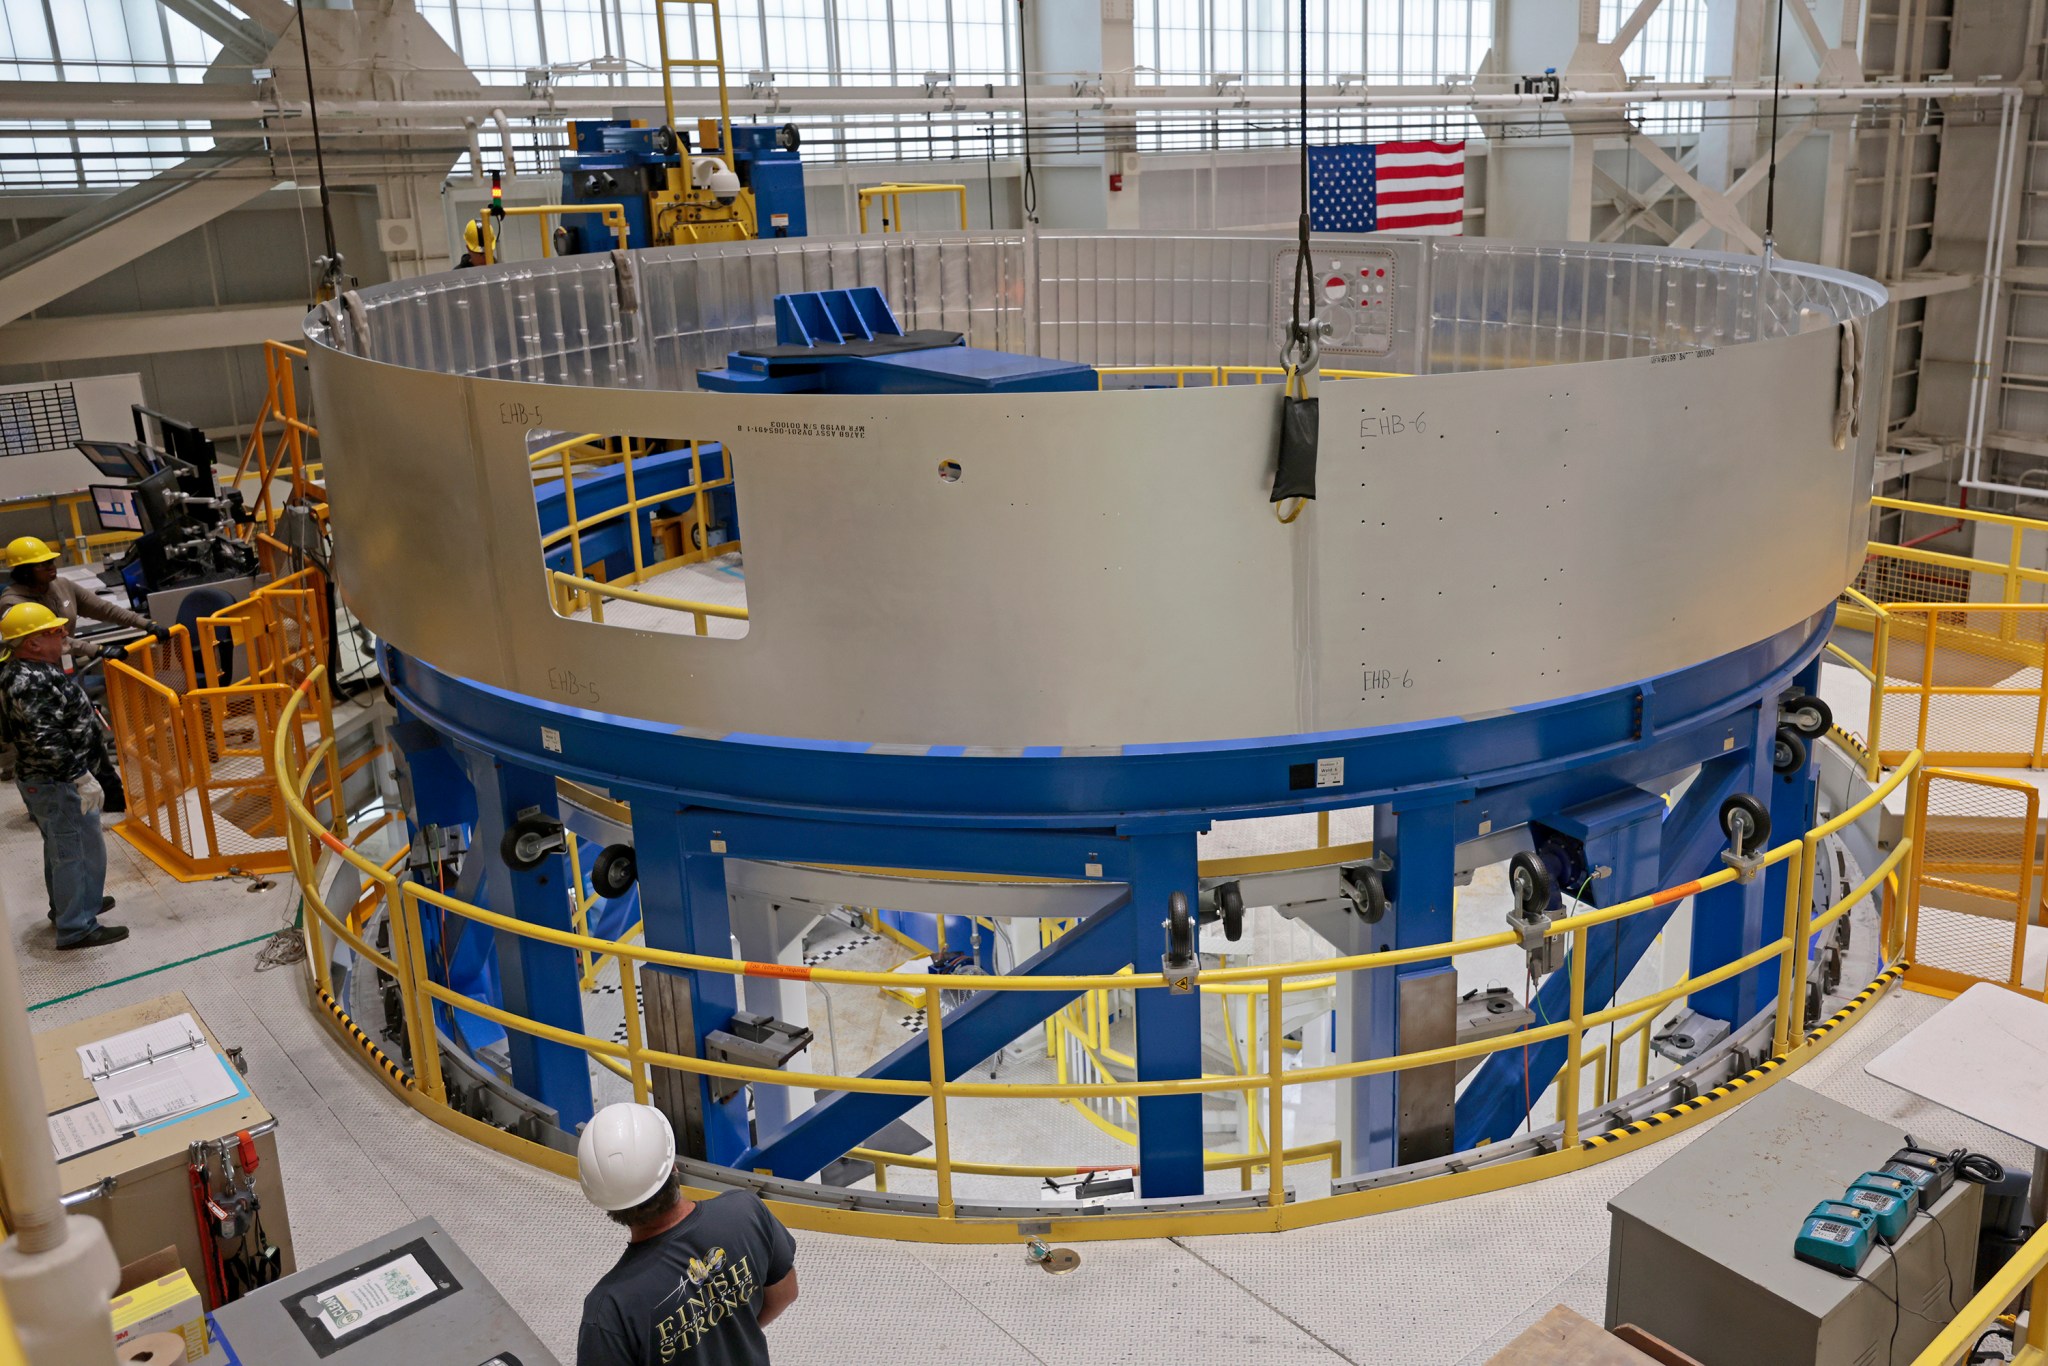 NASA completed manufacturing of a hydrogen tank barrel that will be tested as a weld confidence article for the Space Launch System (SLS) rocket’s Exploration Upper Stage (EUS). Weld confidence articles help establish welding procedures and interfaces between the tooling and hardware and ensure the structural integrity of the welds. Starting with the Artemis IV mission, the EUS will provide the power to send astronauts in NASA’s Orion spacecraft and heavy cargo on a precise trajectory to the Moon.